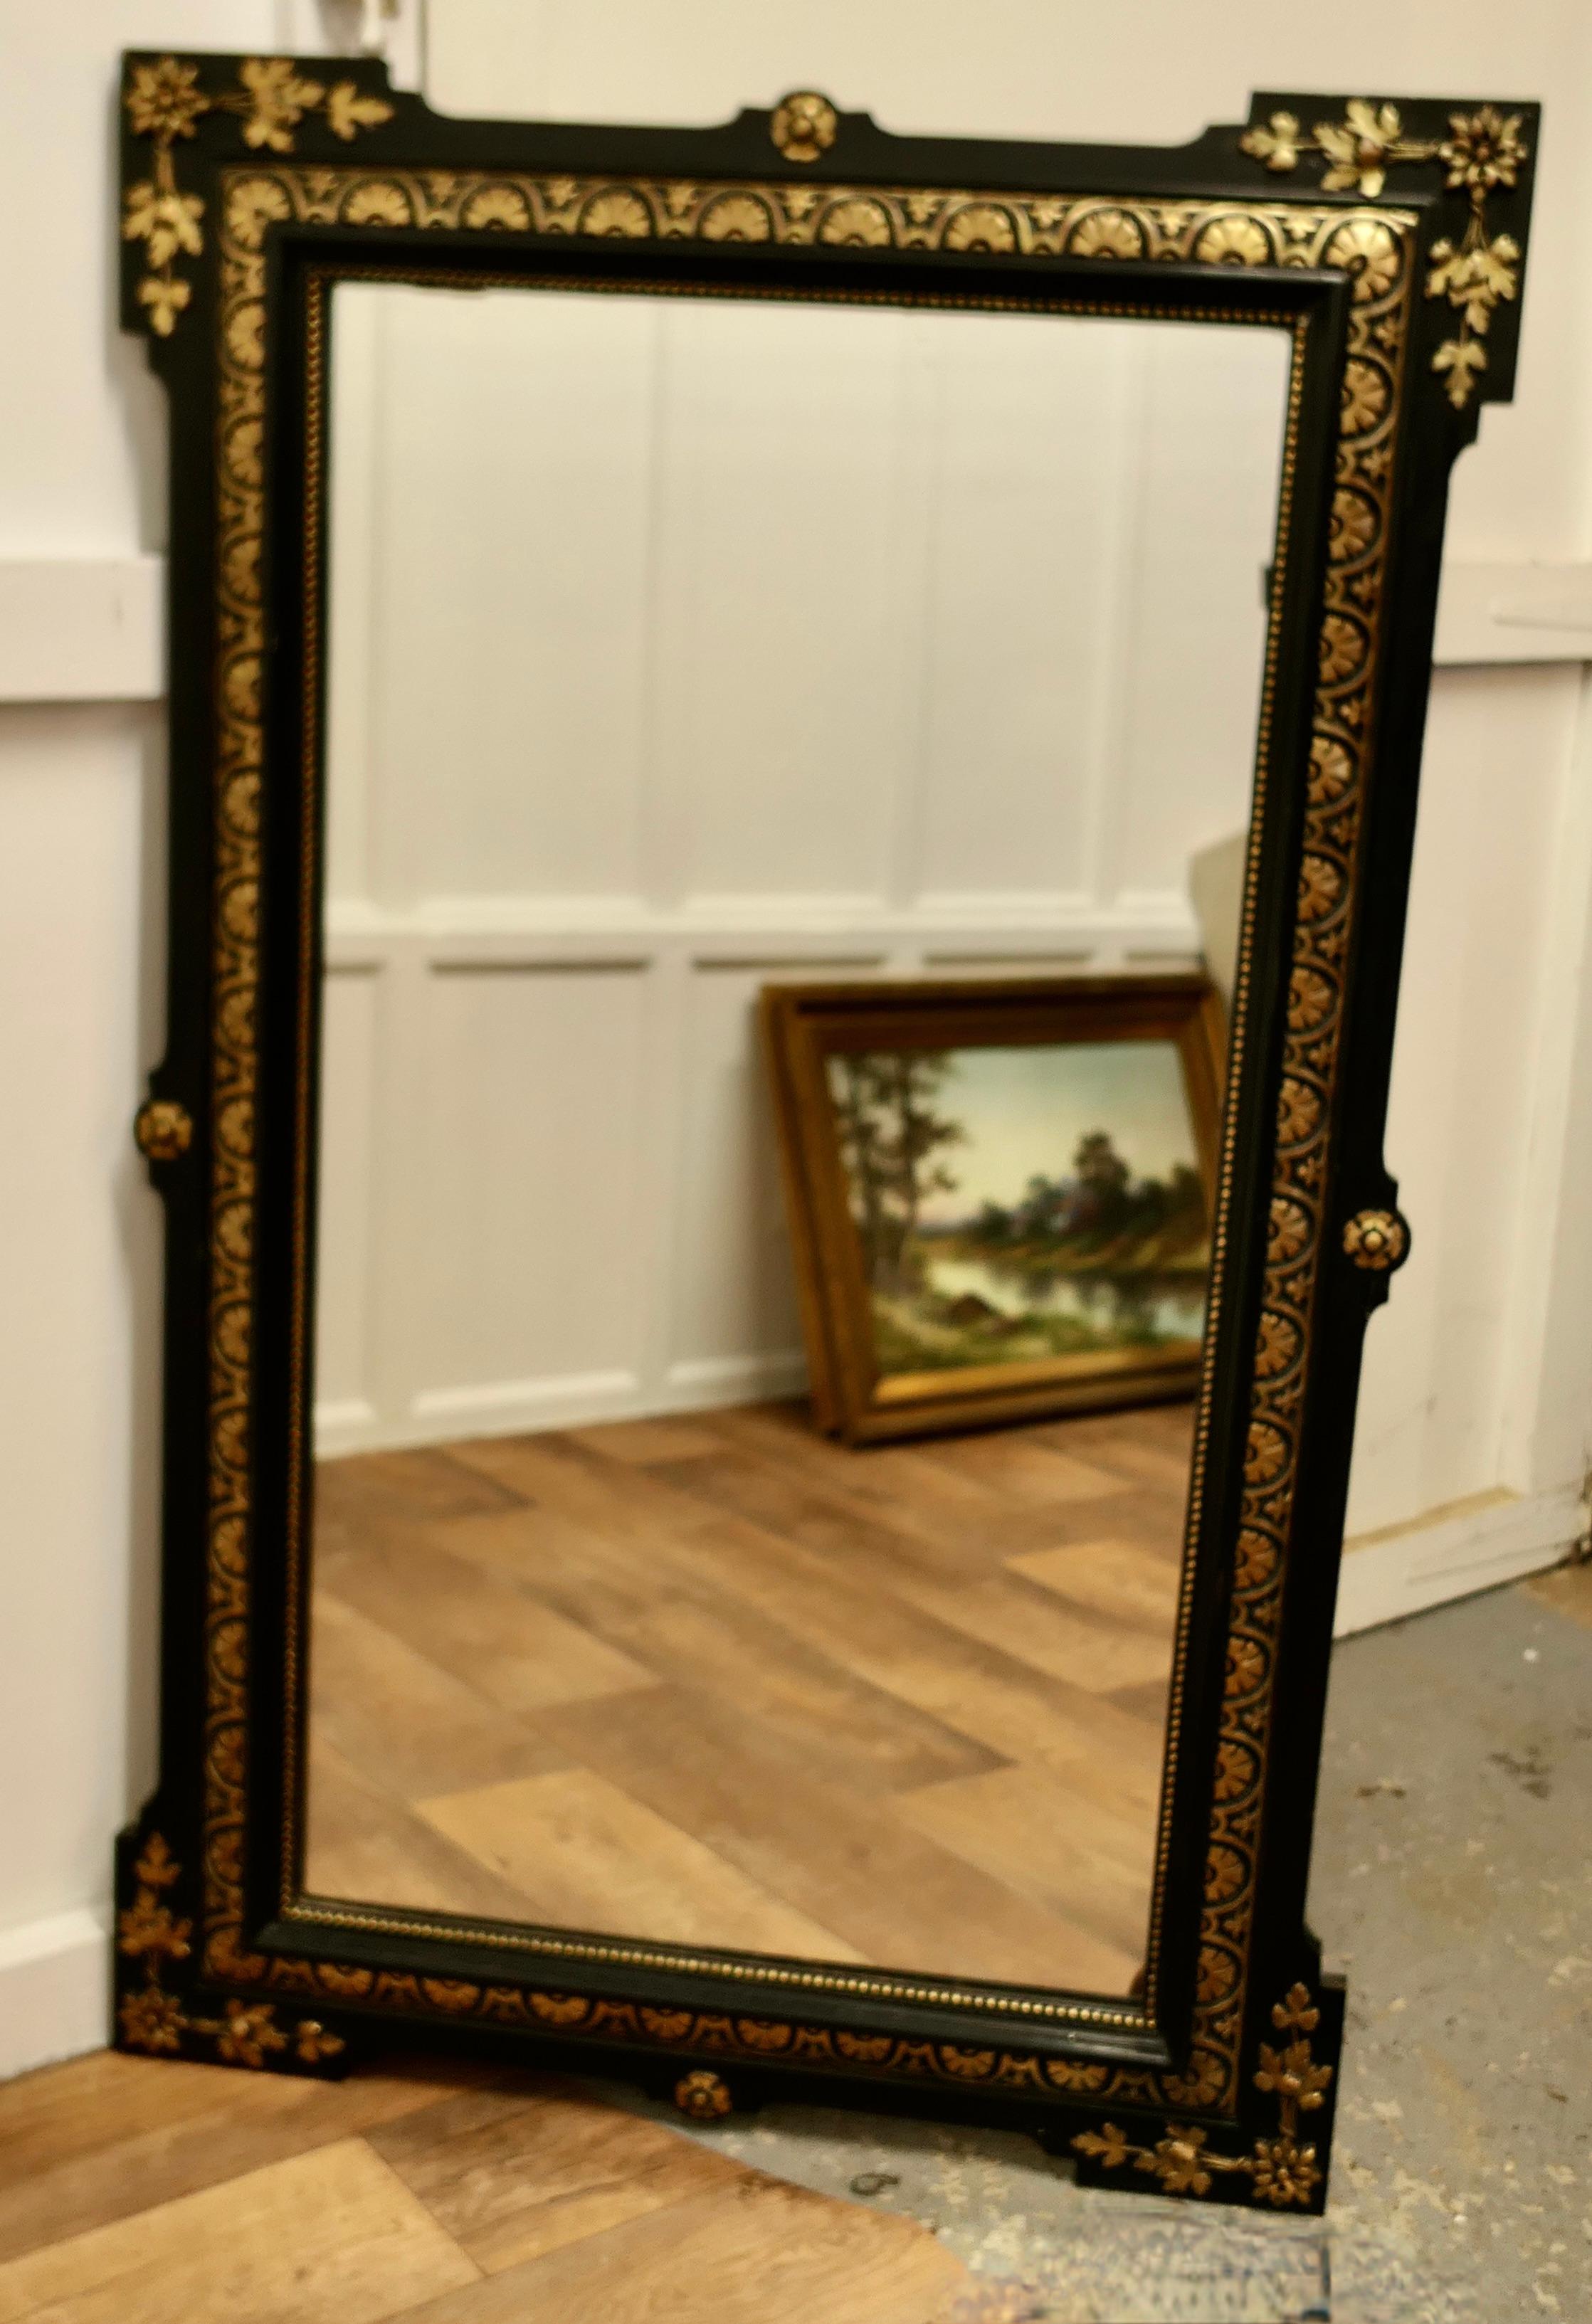 Large French 19th Century Black and Detailed Gold Overmantel Mirror

This is a stunning Overmantel or Wall Mirror a superb example of French chic furnishing, the 4” wide ebonised mirror frame has gold leaf decoration in both a geometric and leaf